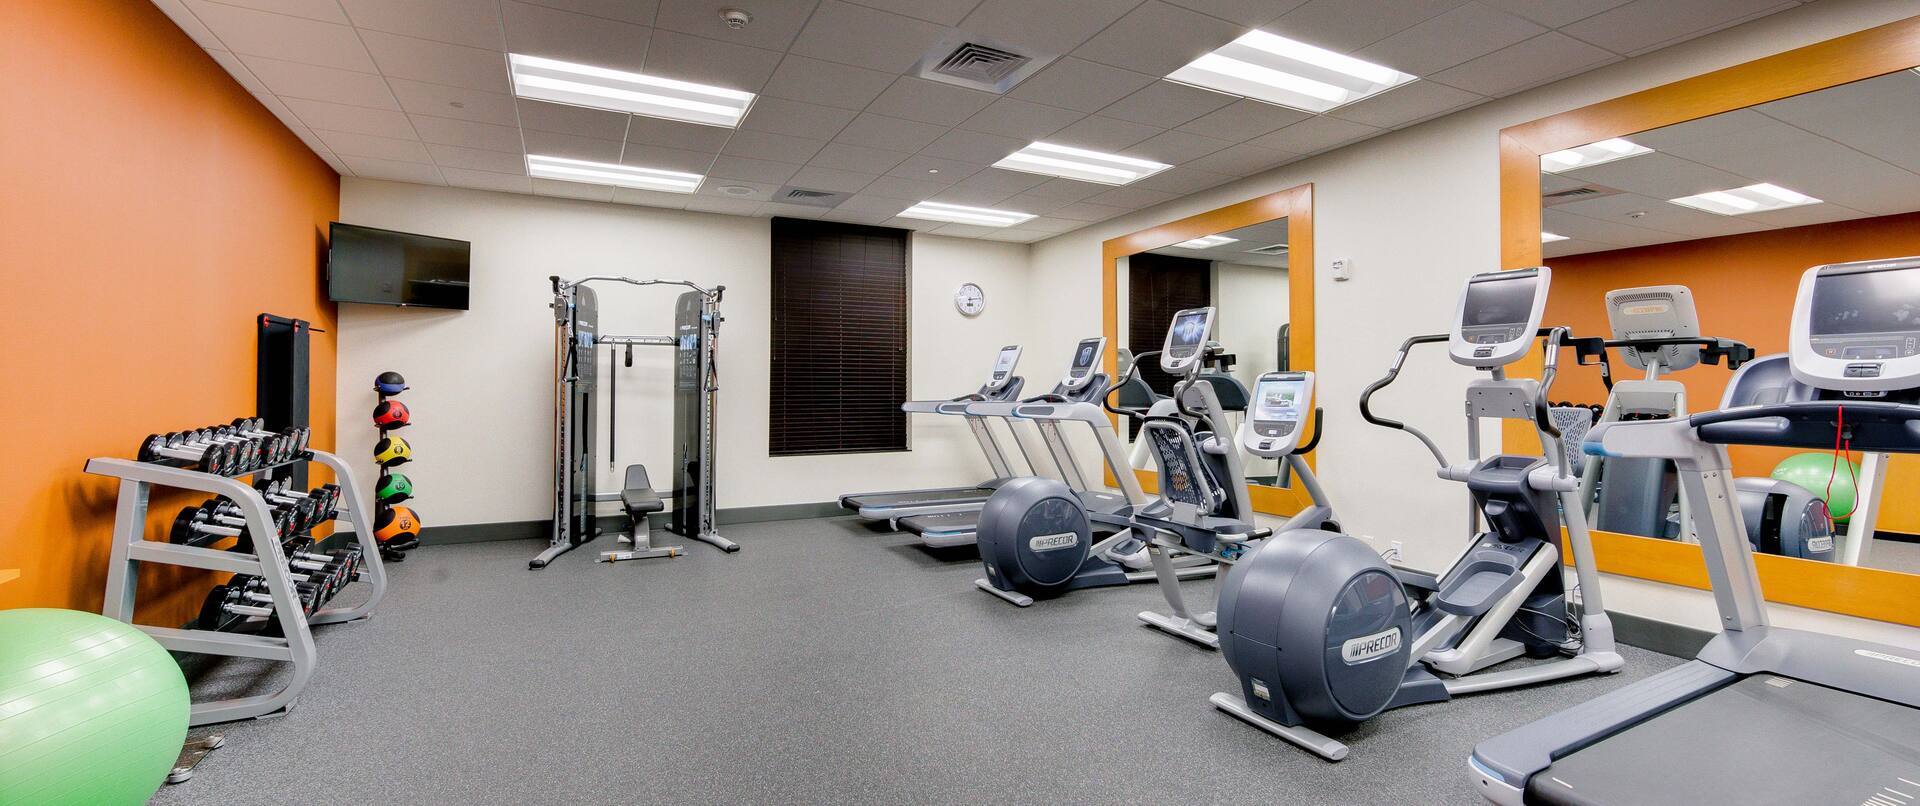 Fitness Center With Green Exercise Ball, Free Weights, TV Above Weight Balls, Weight Machine With Bench, and Cardio Equipment Facing Two Large Mirrors